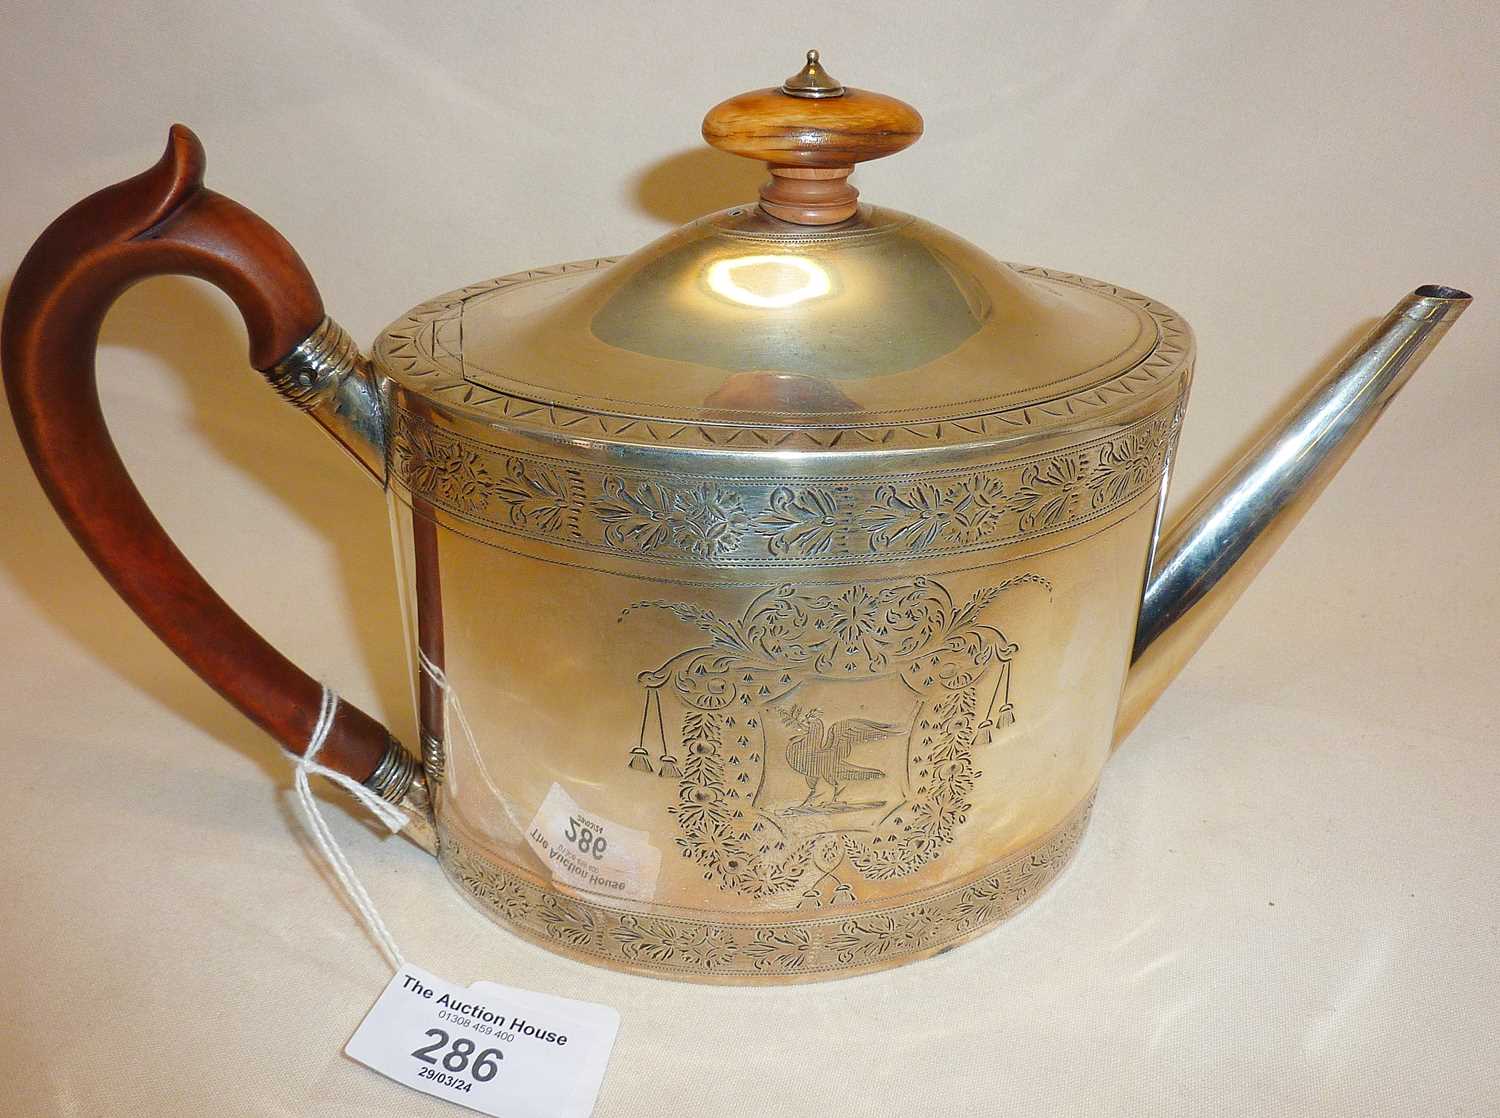 George III finely engraved silver teapot, hallmarked for London 1793, Henry Chawner, approx weight